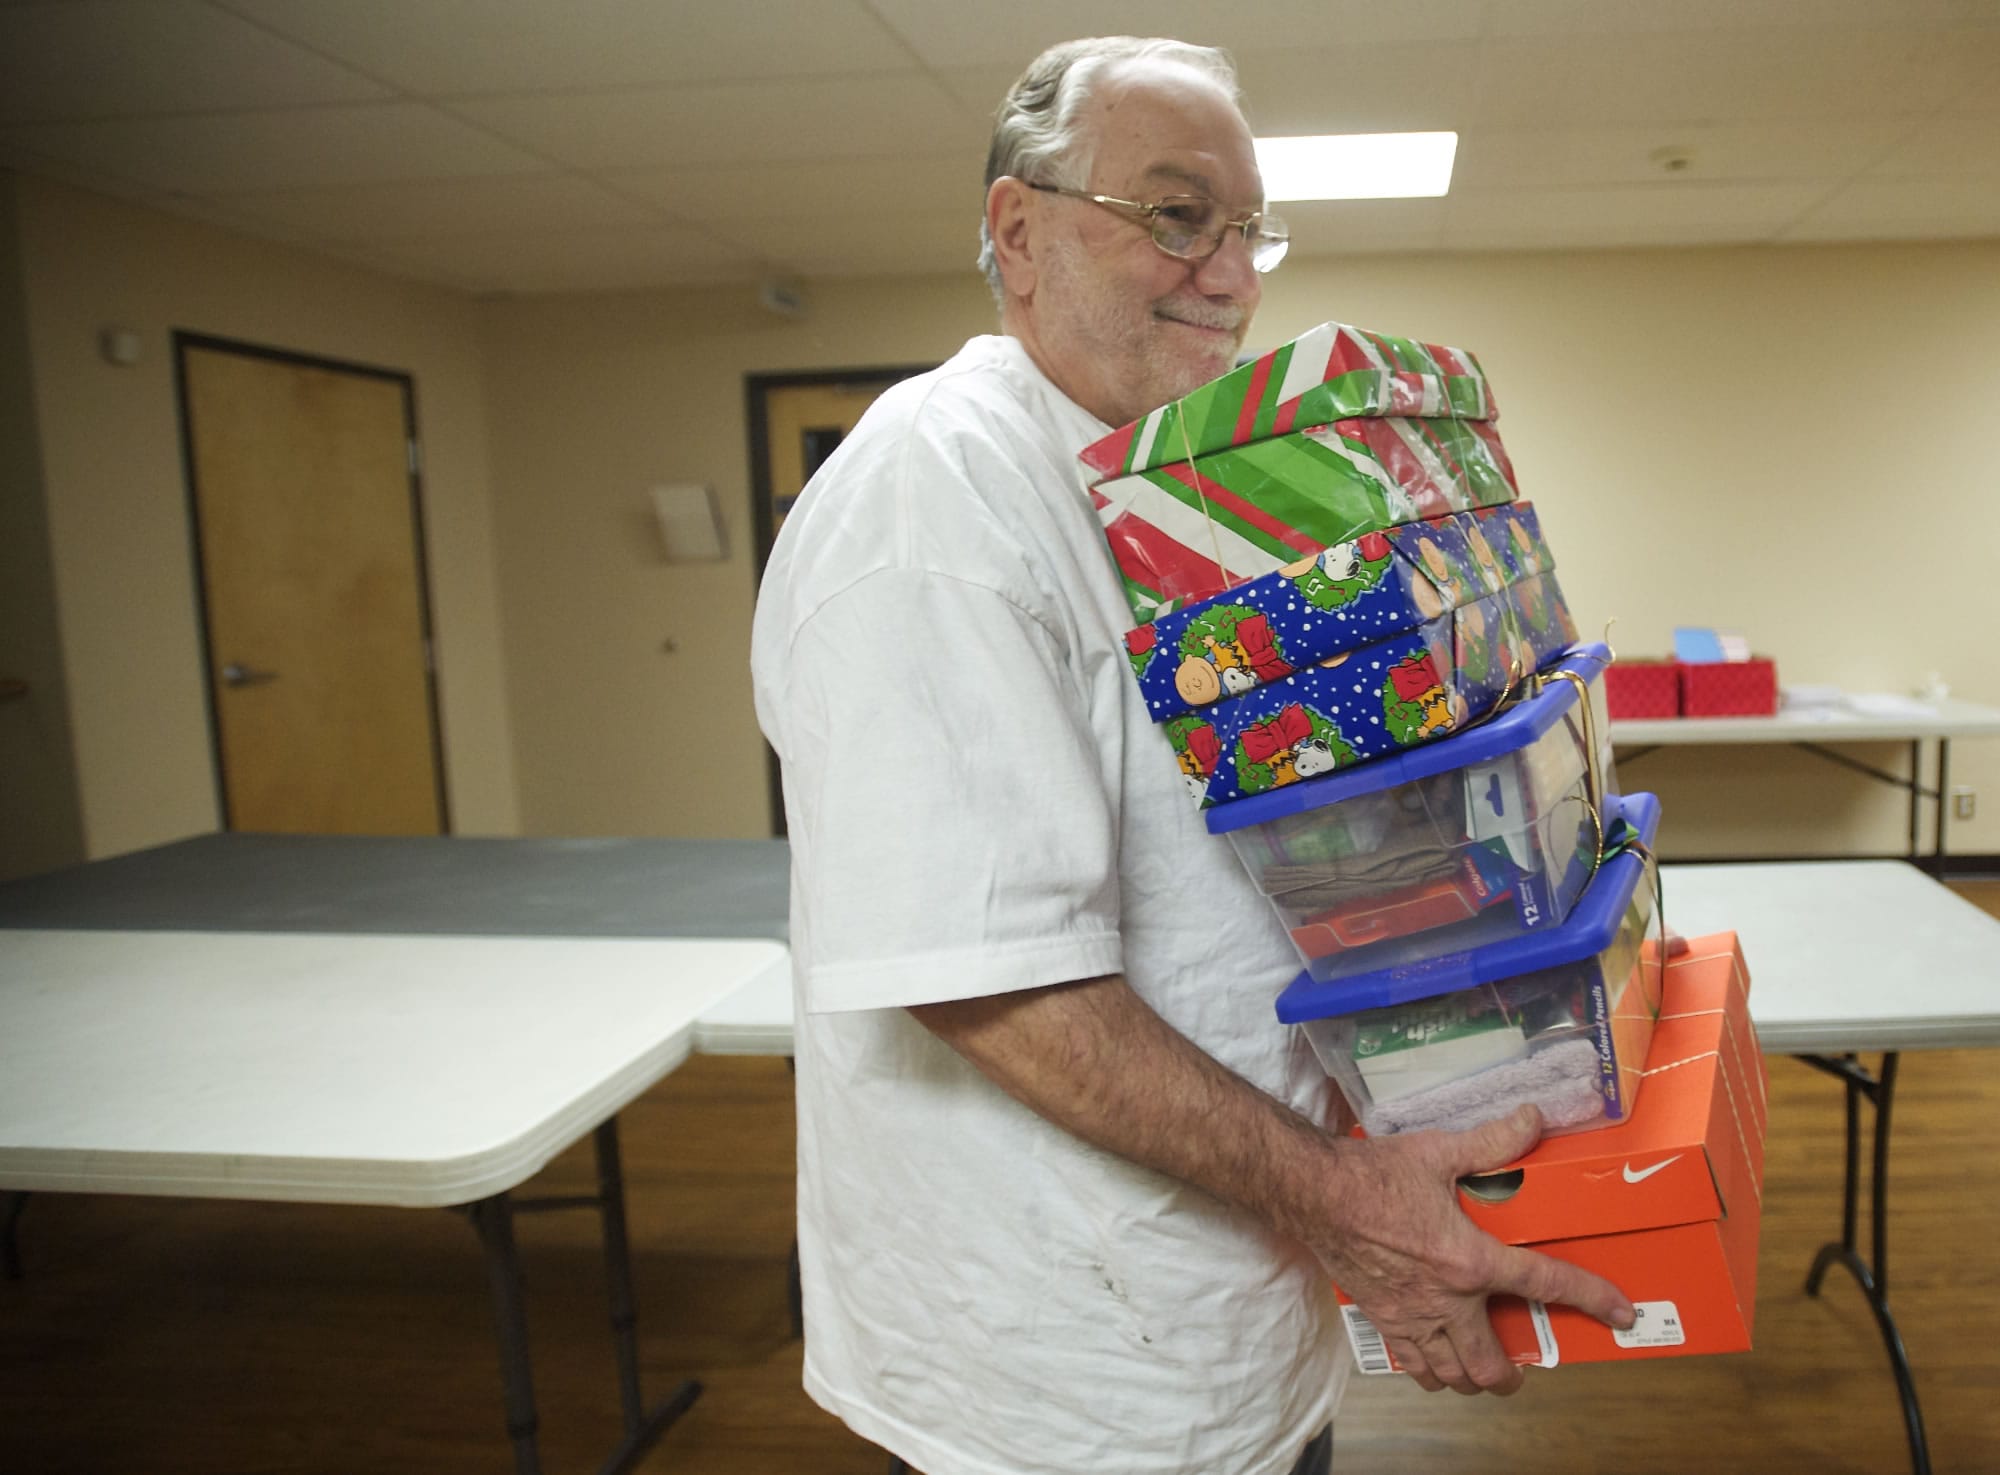 On Saturday, volunteer John Benson, 76, of the First Evangelical Church carries off gift-filled shoe boxes that will be distributed to needy children in 130 countries.